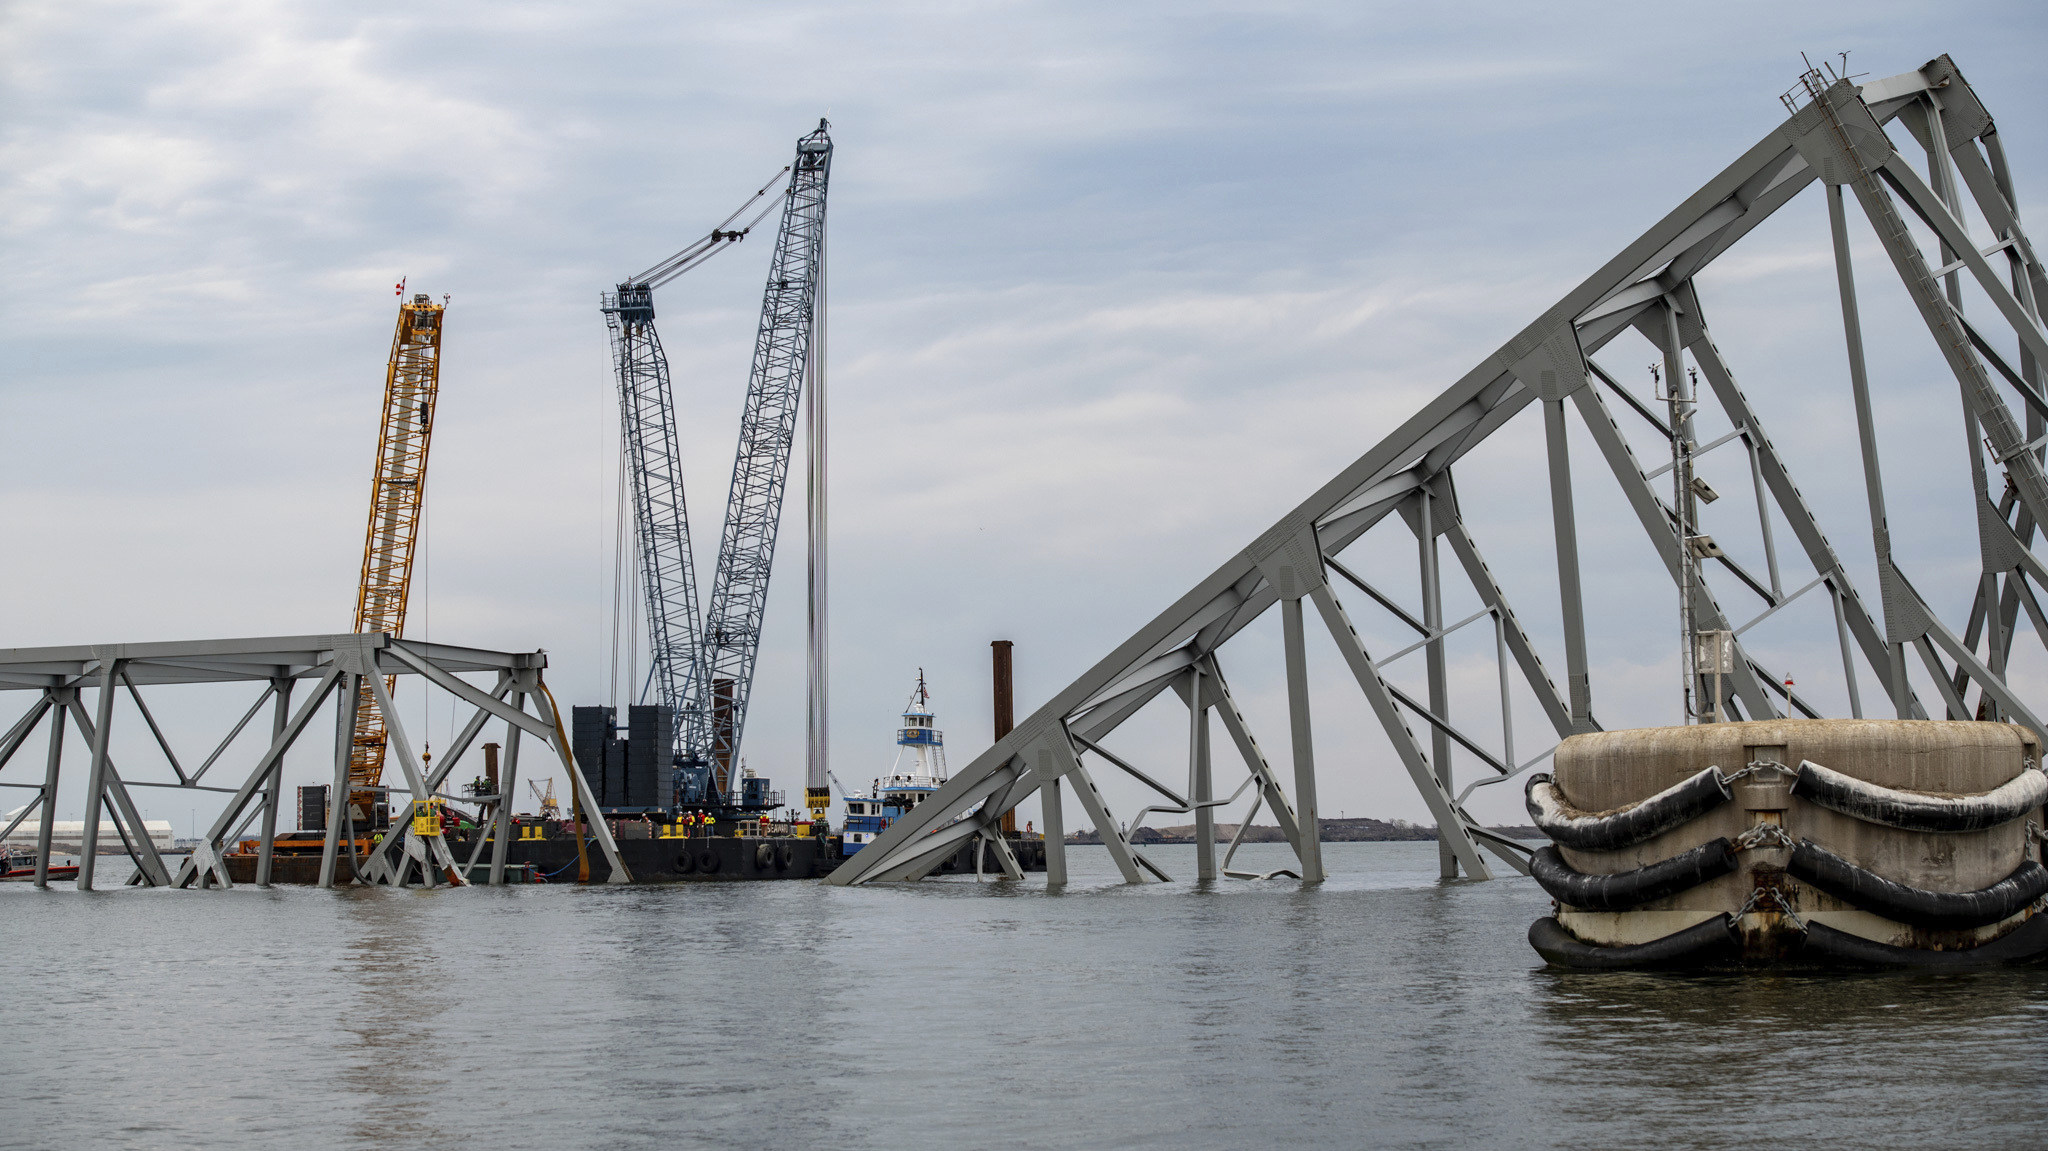 Salvage operations on the Francis Scott Key Bridge take place in Baltimore on March 30. Photo: US Coastguard via AP